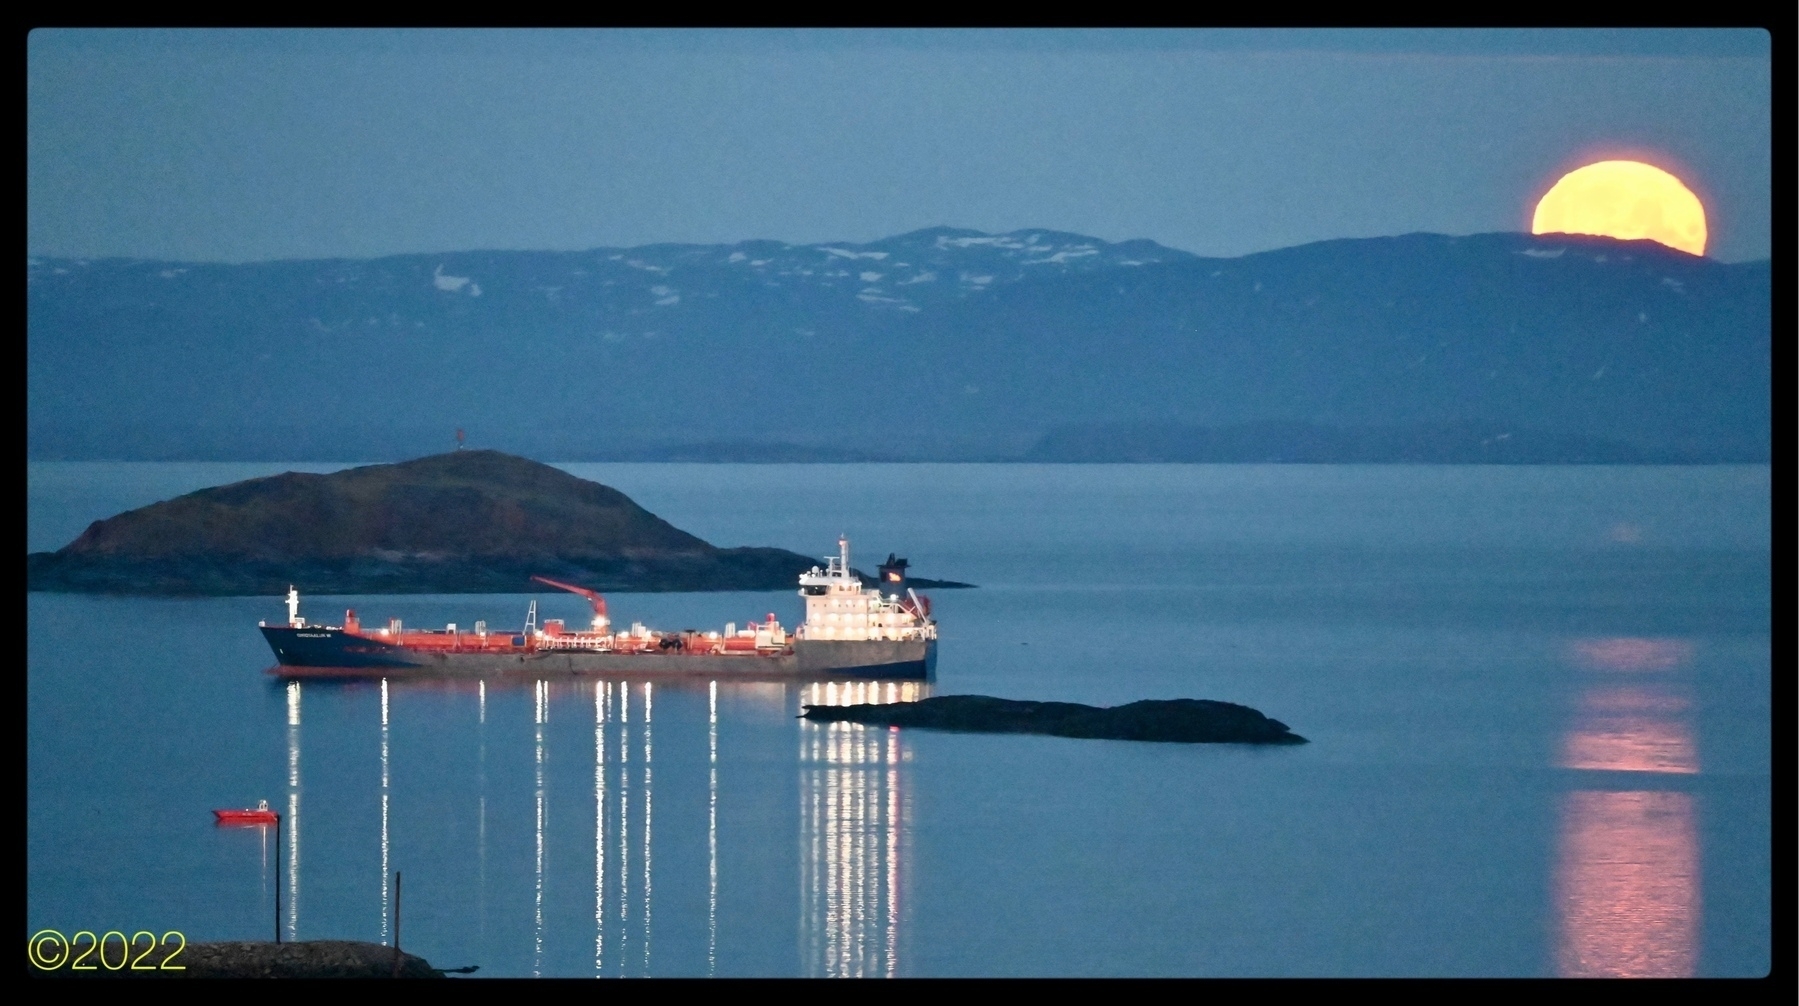 The cargo ship Qikigtaaluk W anchored in the night in Frobisher Bay, the moon dipping below the horizon to the right